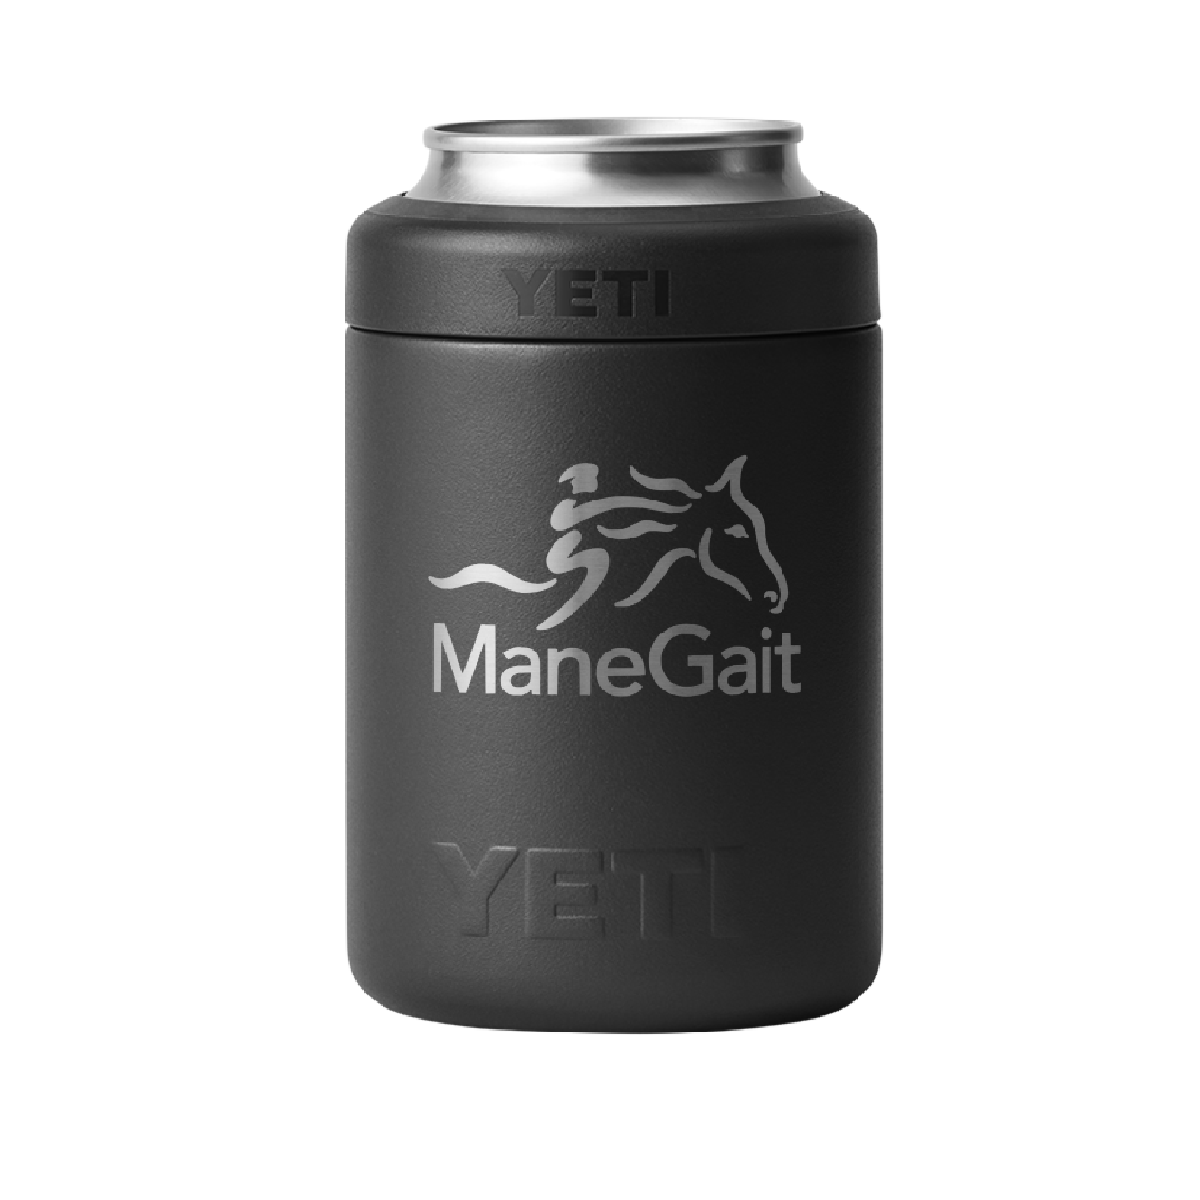 Track 424 X Yeti Can Cooler